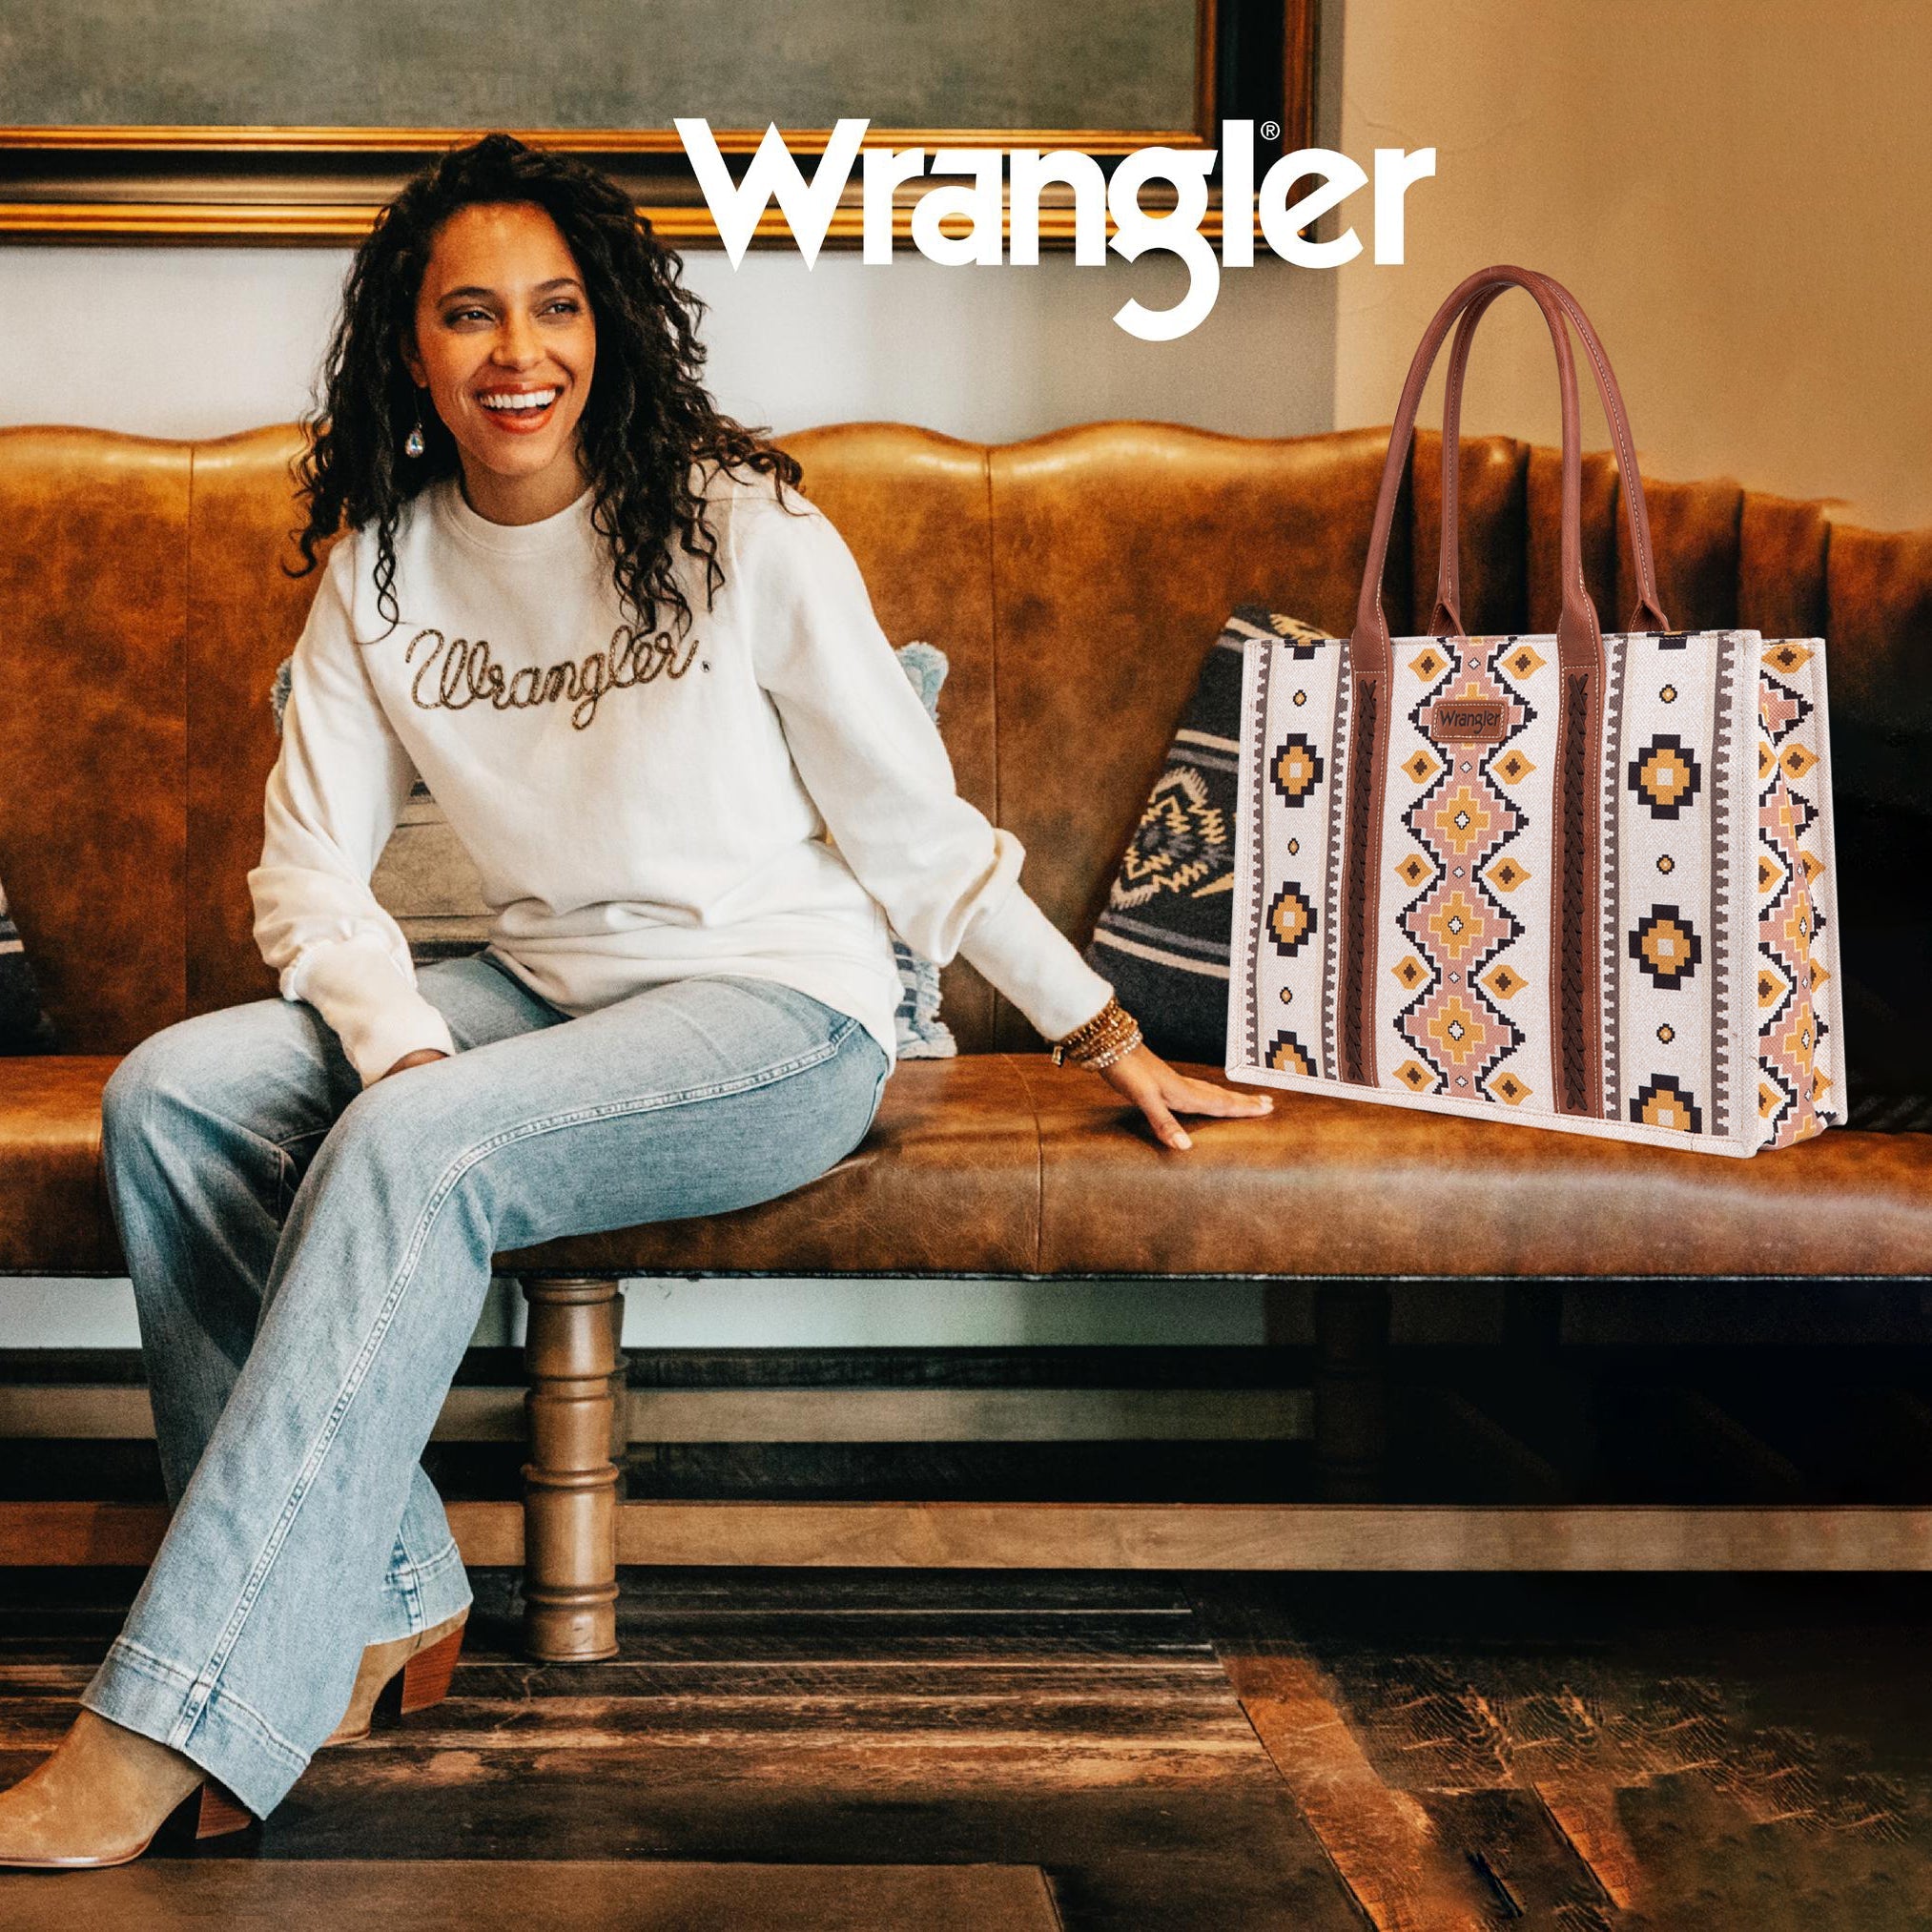 [Best Seller]Wrangler Southwestern Dual Sided Print Canvas Tote/Crossbody Collection - Cowgirl Wear